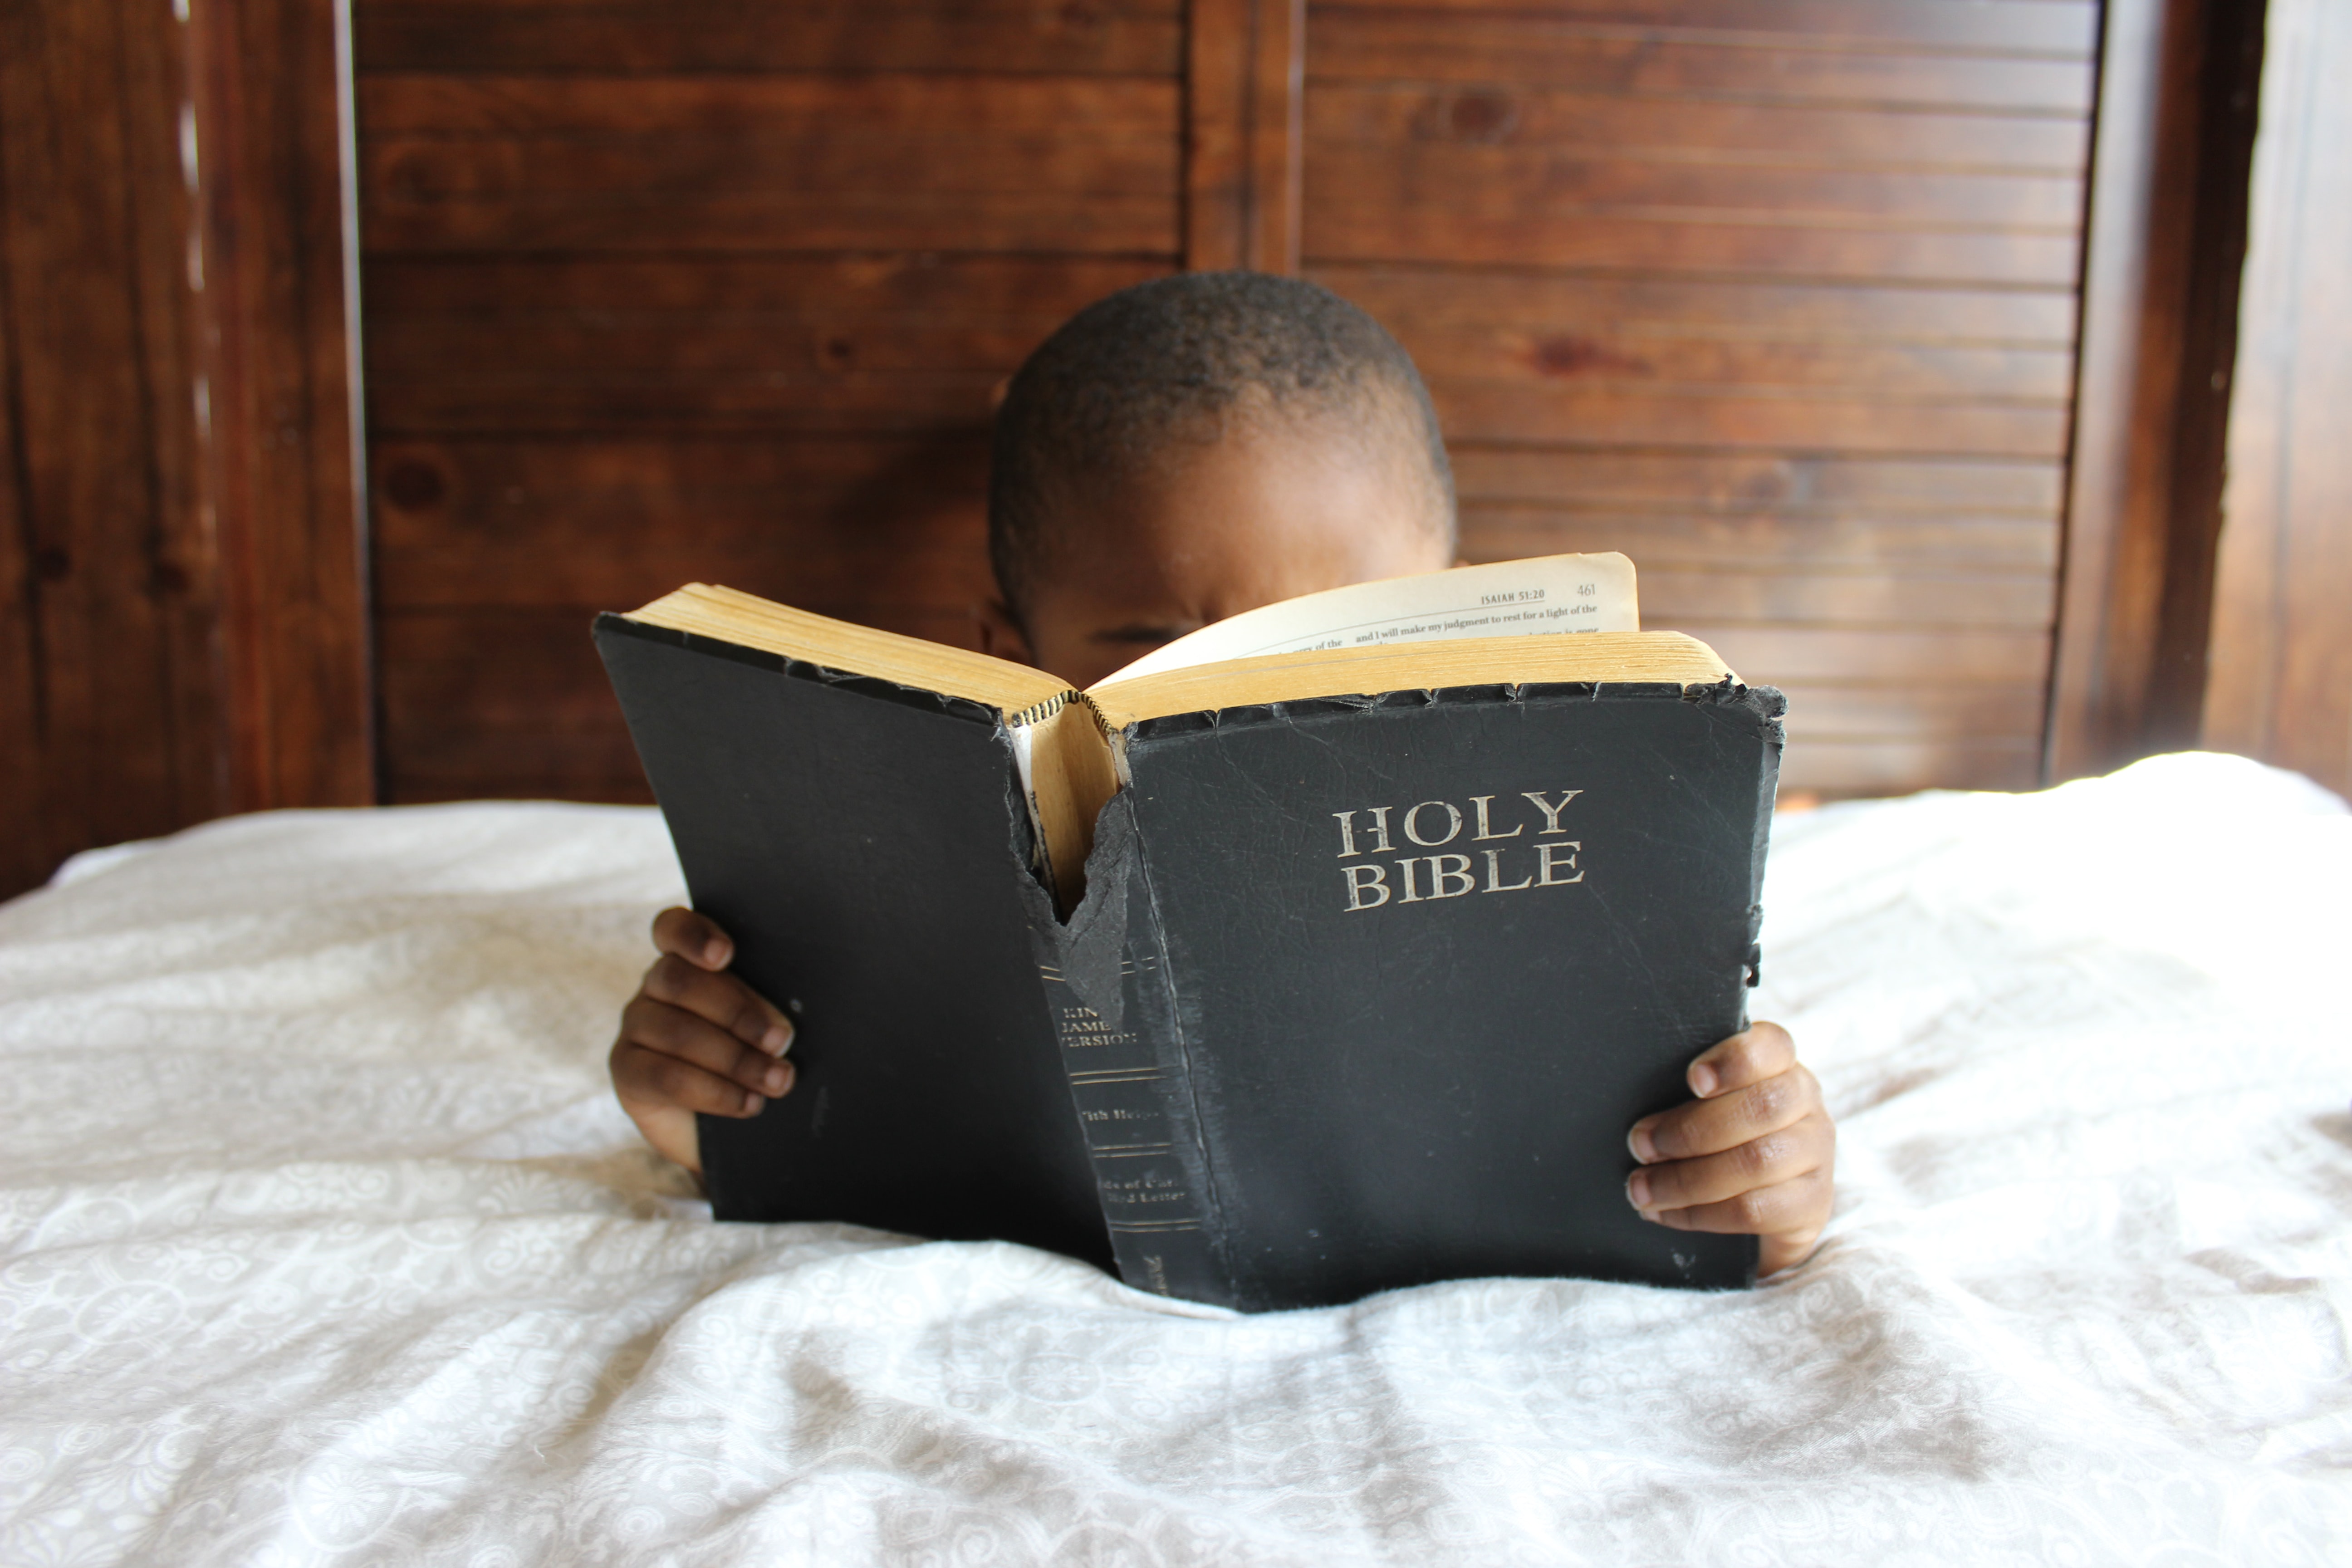 Cute little boy reading a large Bible covering most of his face